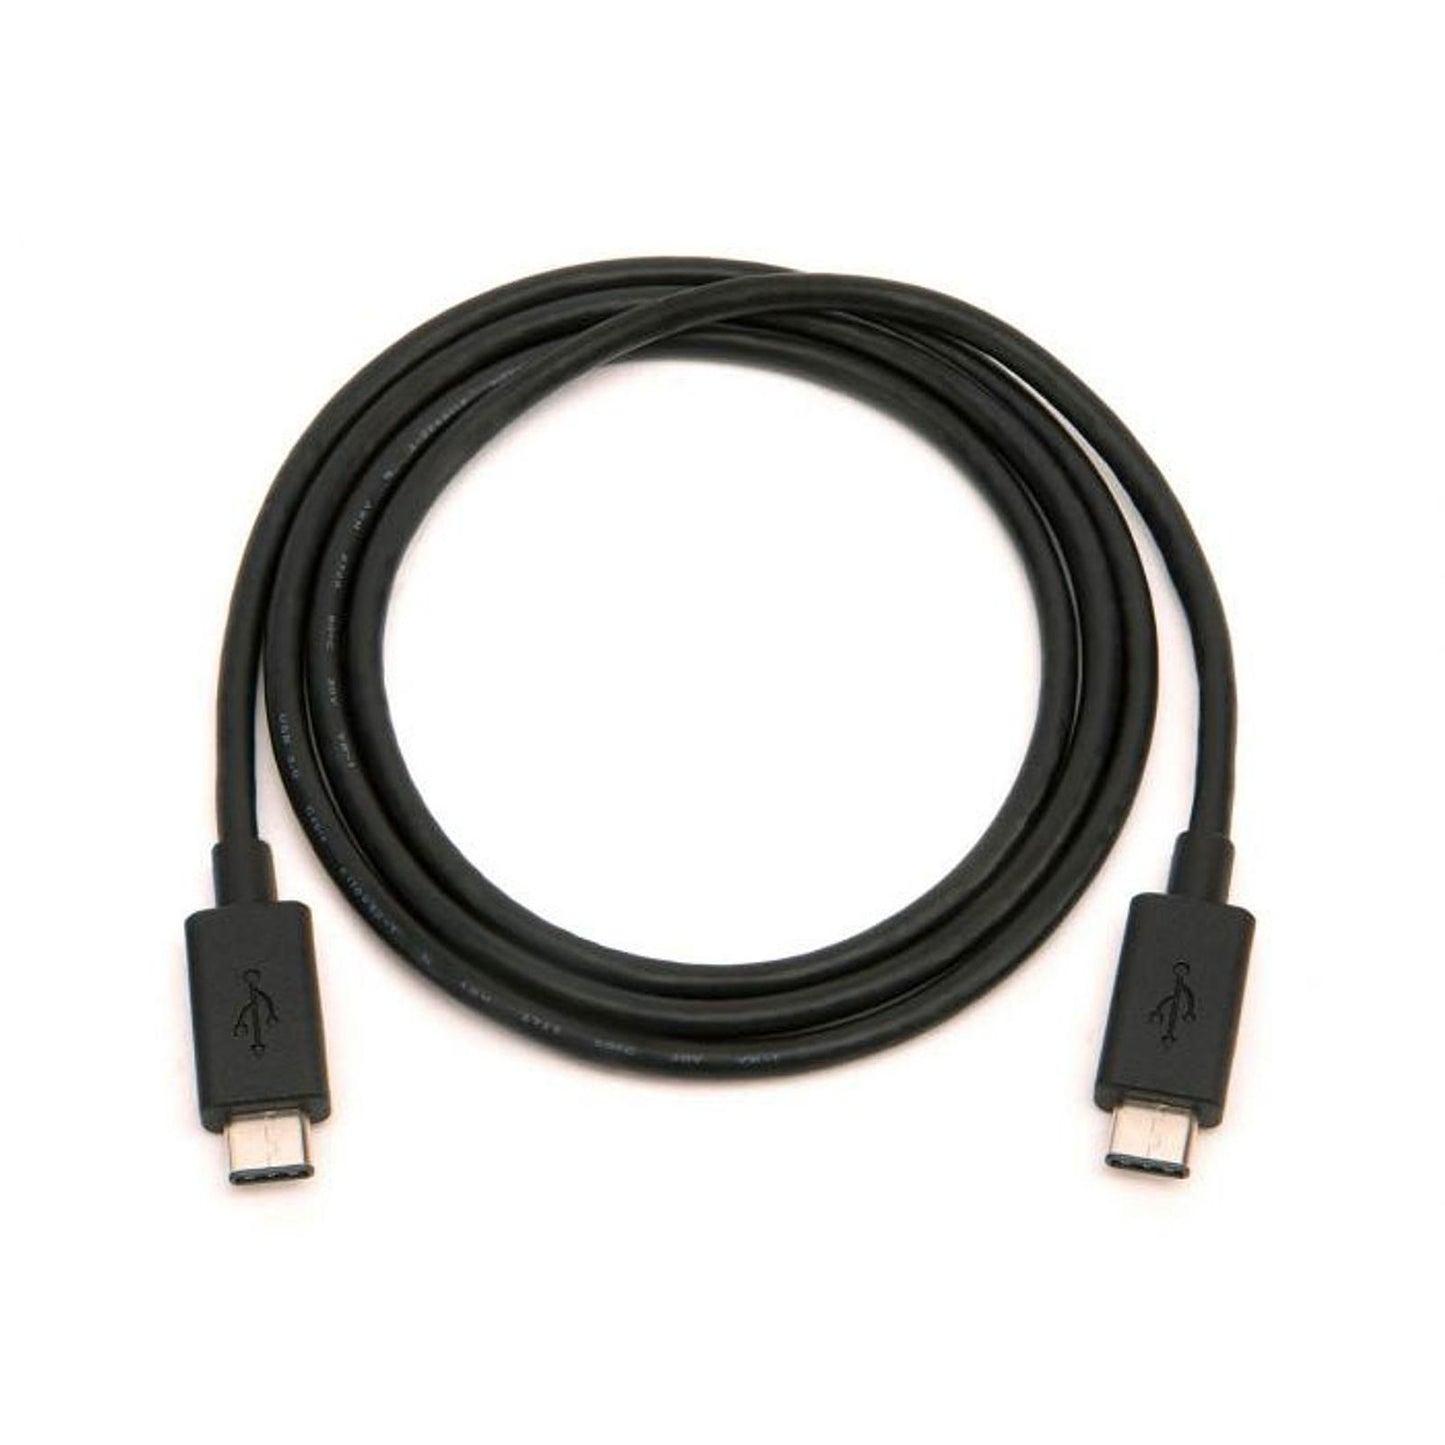 Griffin USB Type-C Cable for 3-foot - Black